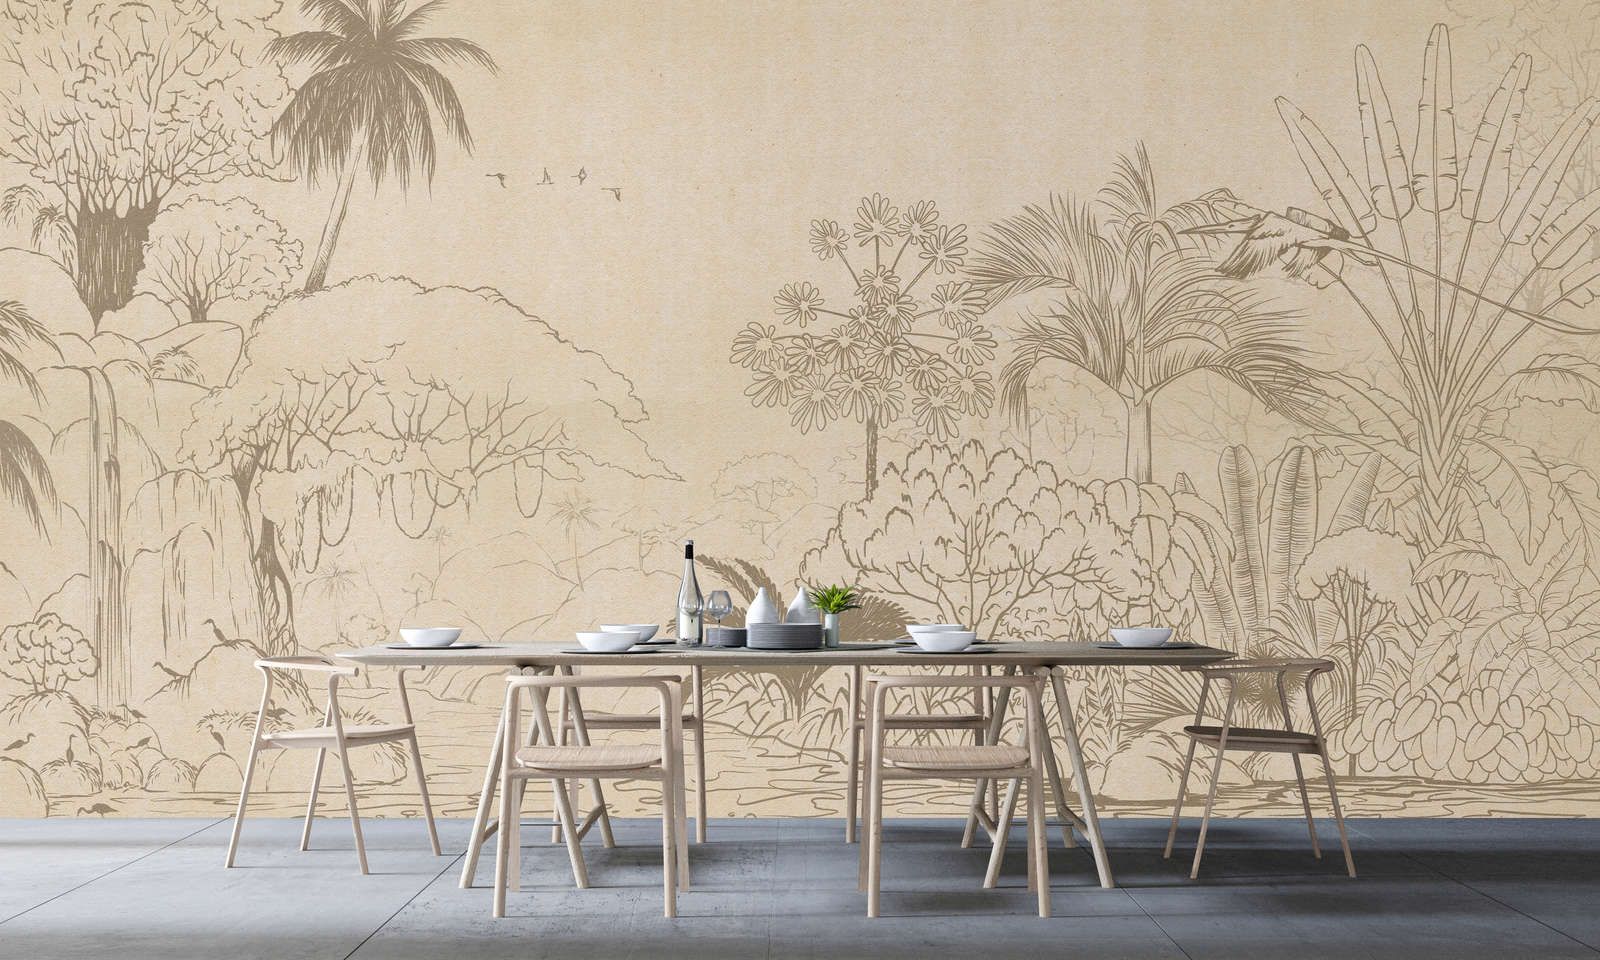             Photo wallpaper »oasis« - Jungle in drawing style with handmade paper look - Lightly textured non-woven fabric
        